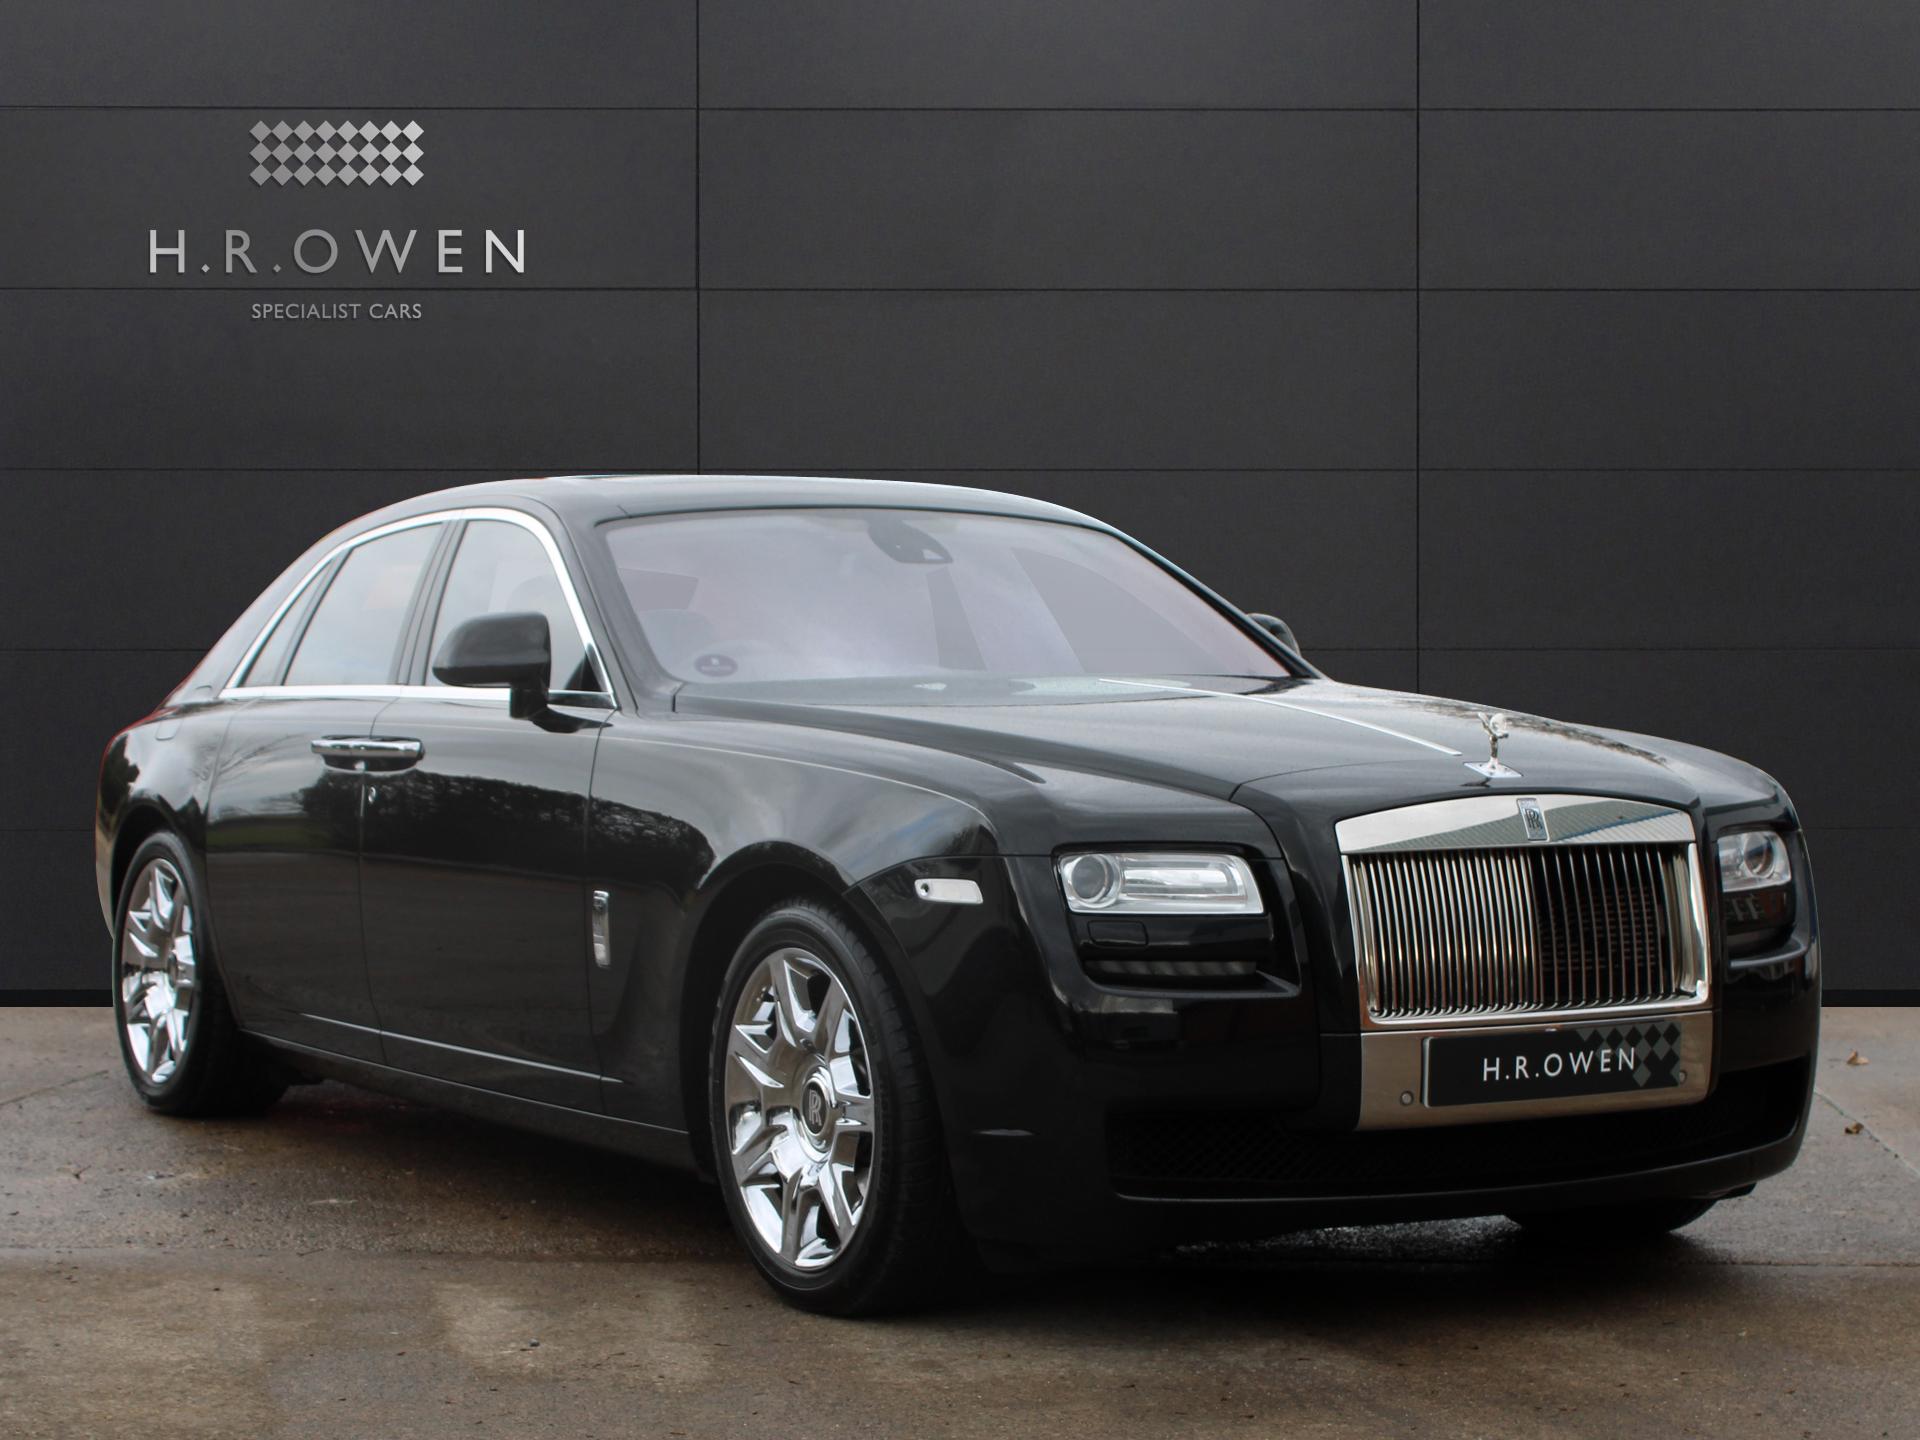 PreOwned RollsRoyce  Available at Rybrook RollsRoyce